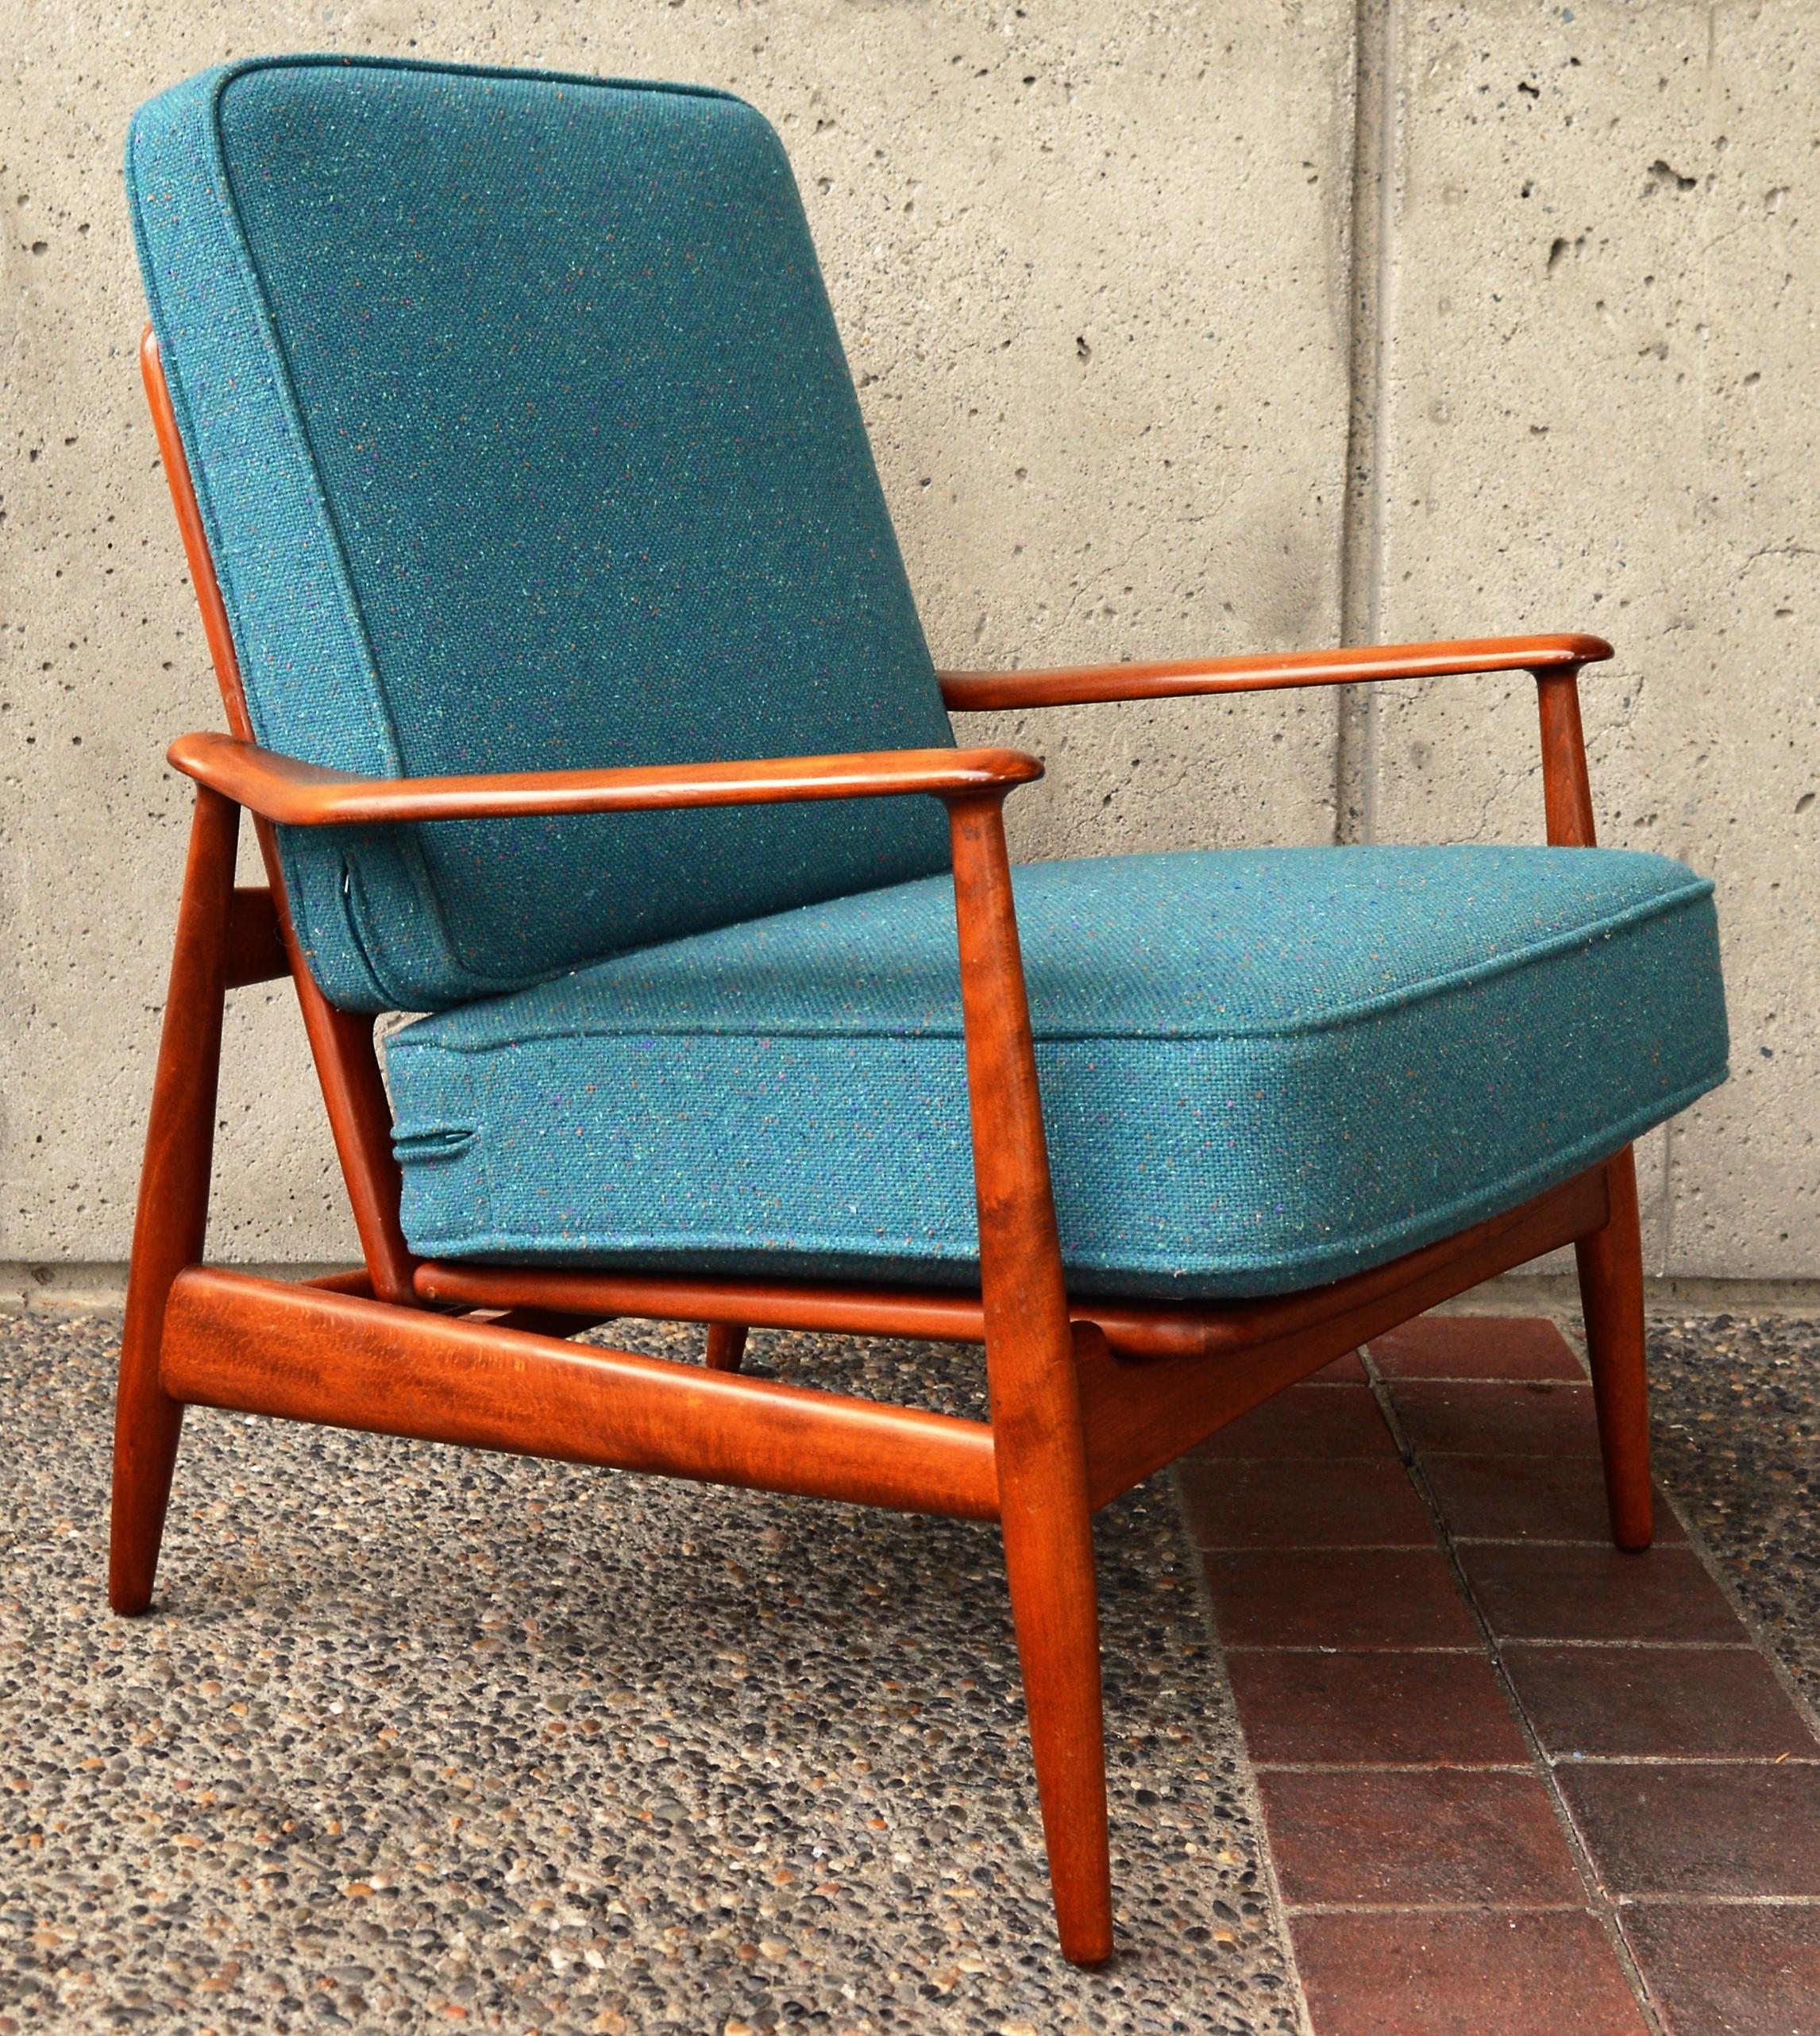 This superb and rare Danish Modern beech two position recliner was designed by Arne Vodder in the 1950s and is in excellent vintage condition. Beautifully designed, every aspect of the chair frame is sculptural and gorgeous, from the flared side